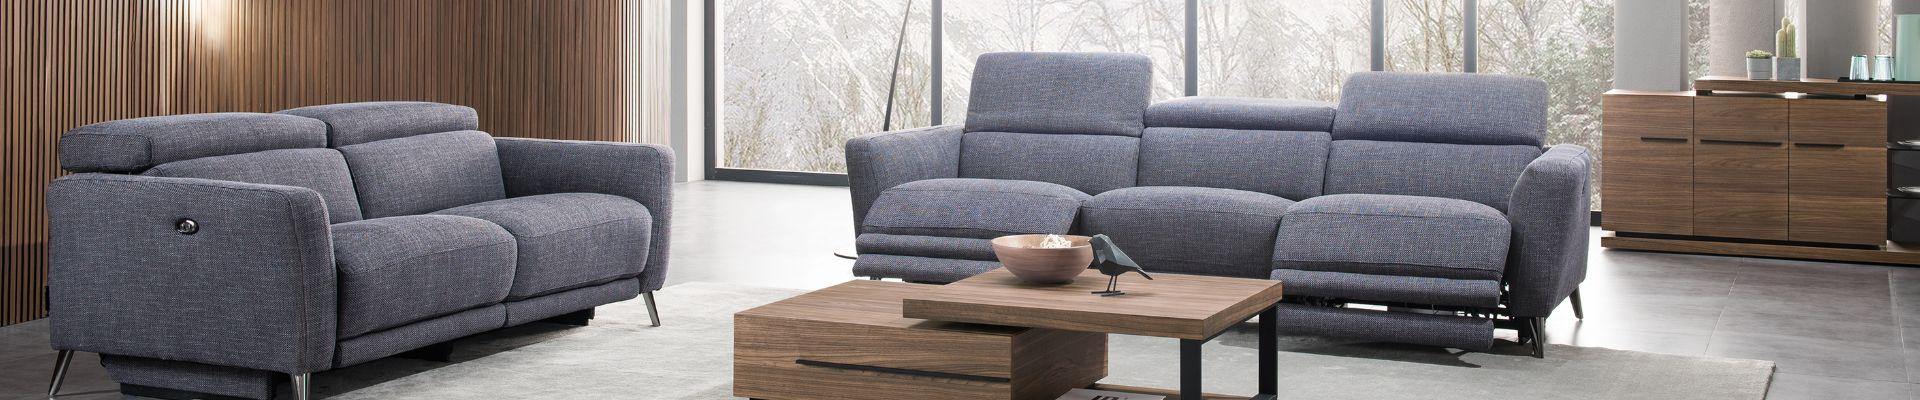 Sofia Electric Recliner Sofa Collection - Gainsville